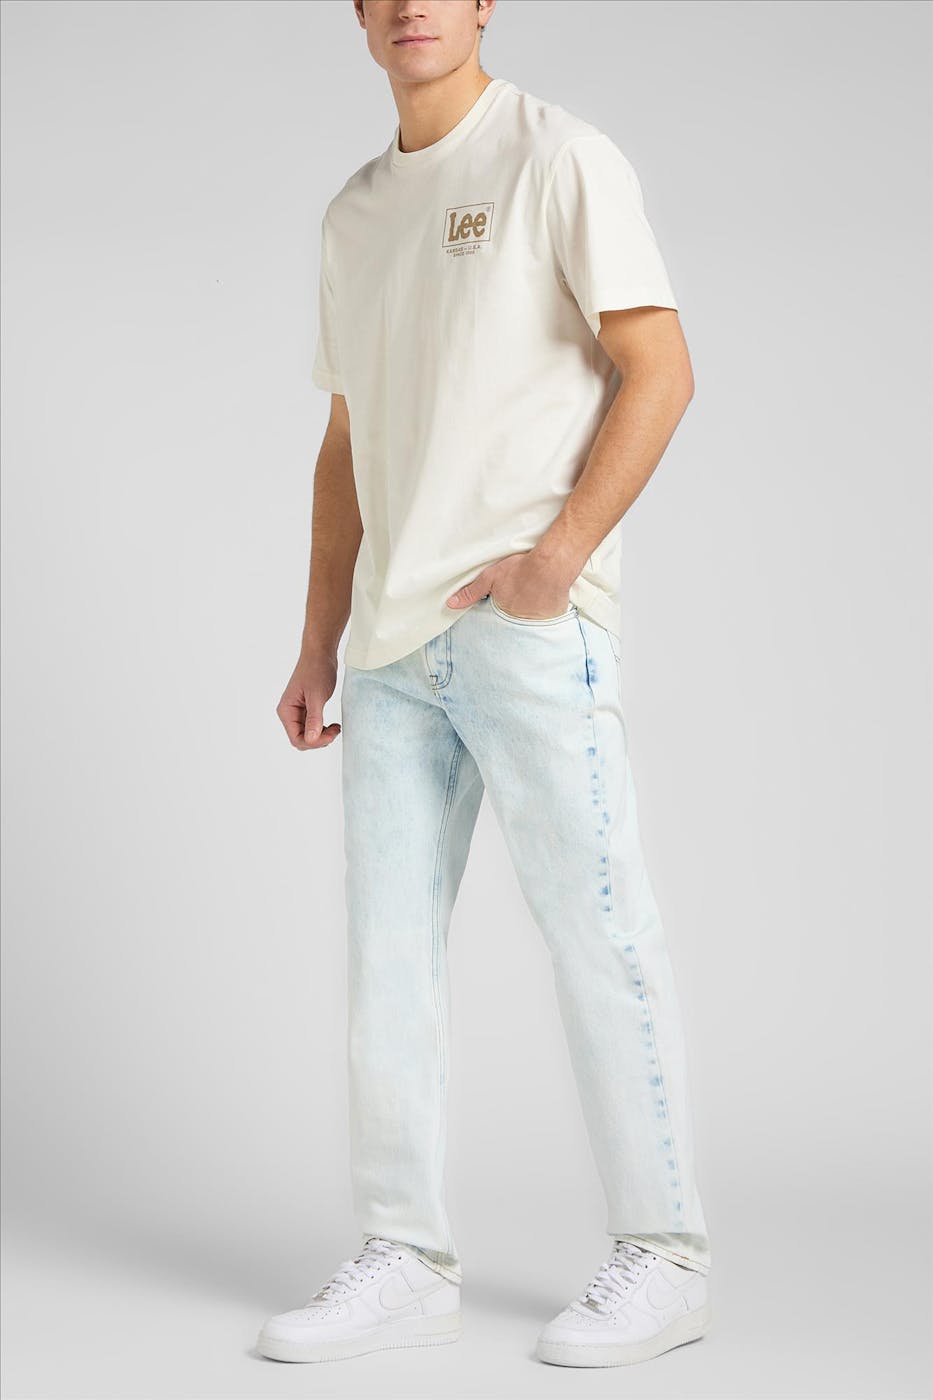 Lee - Bleke West straight tapered jeans